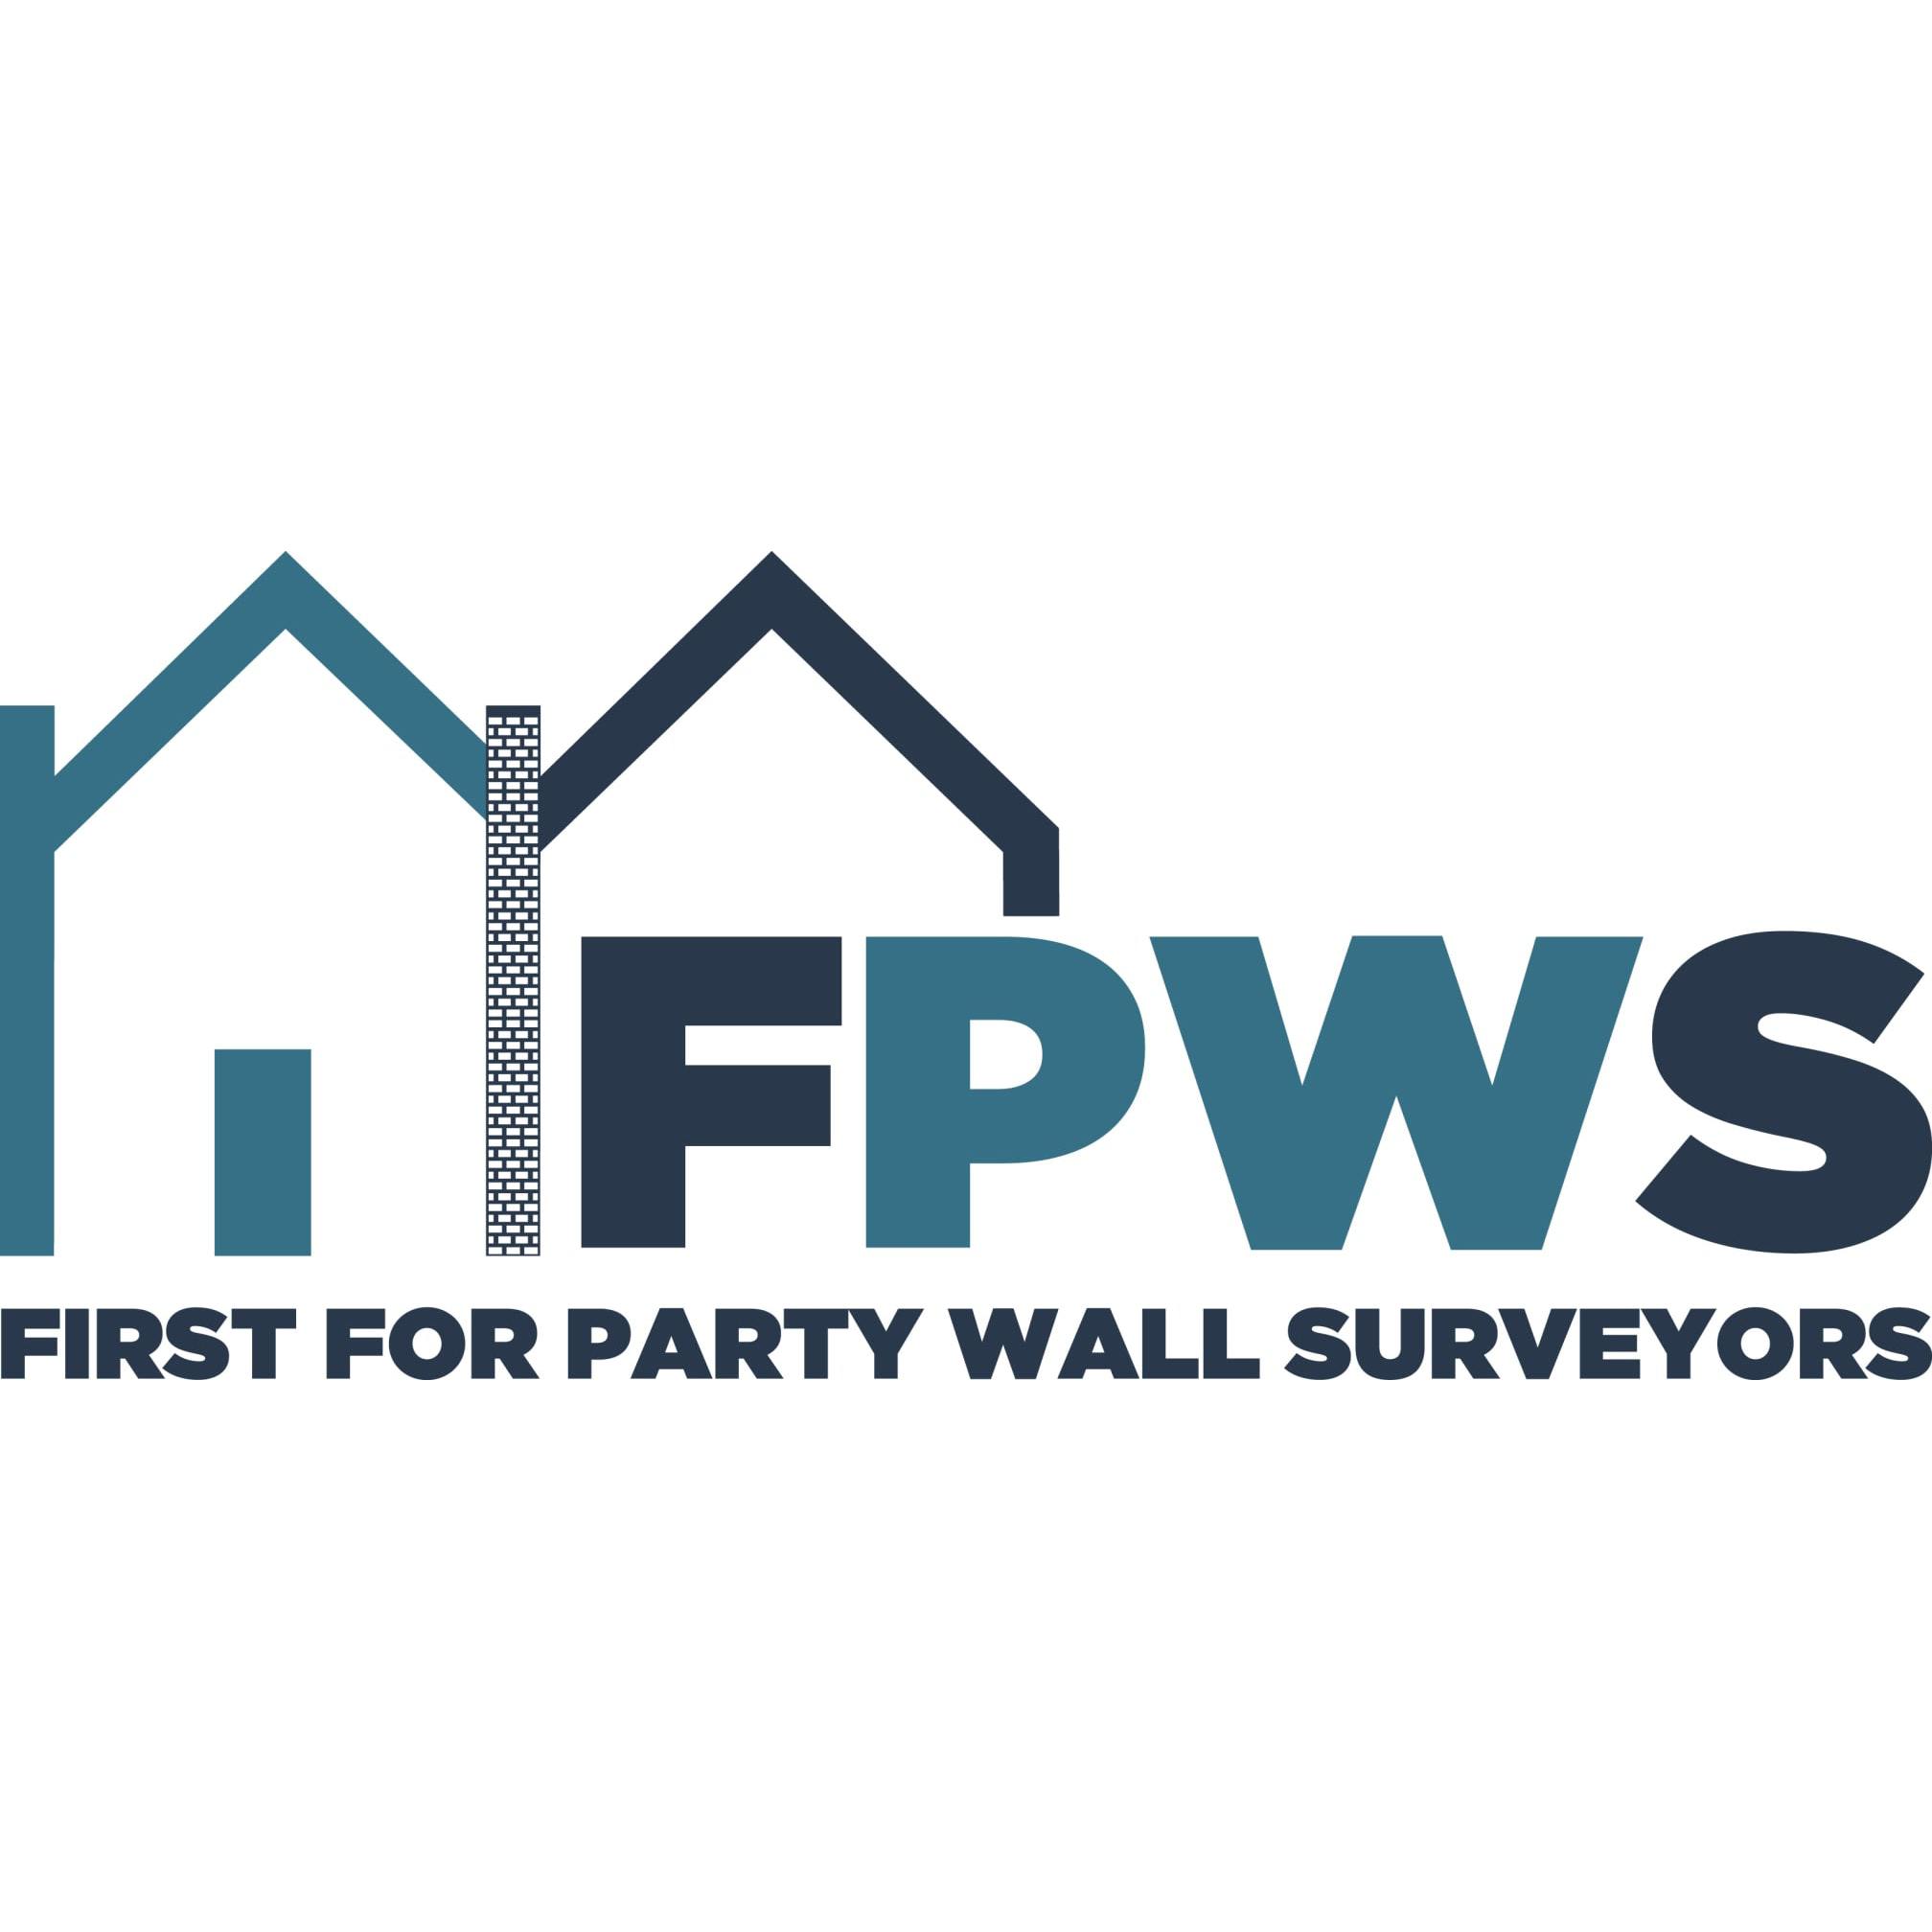 First for Party Wall Surveyors Logo